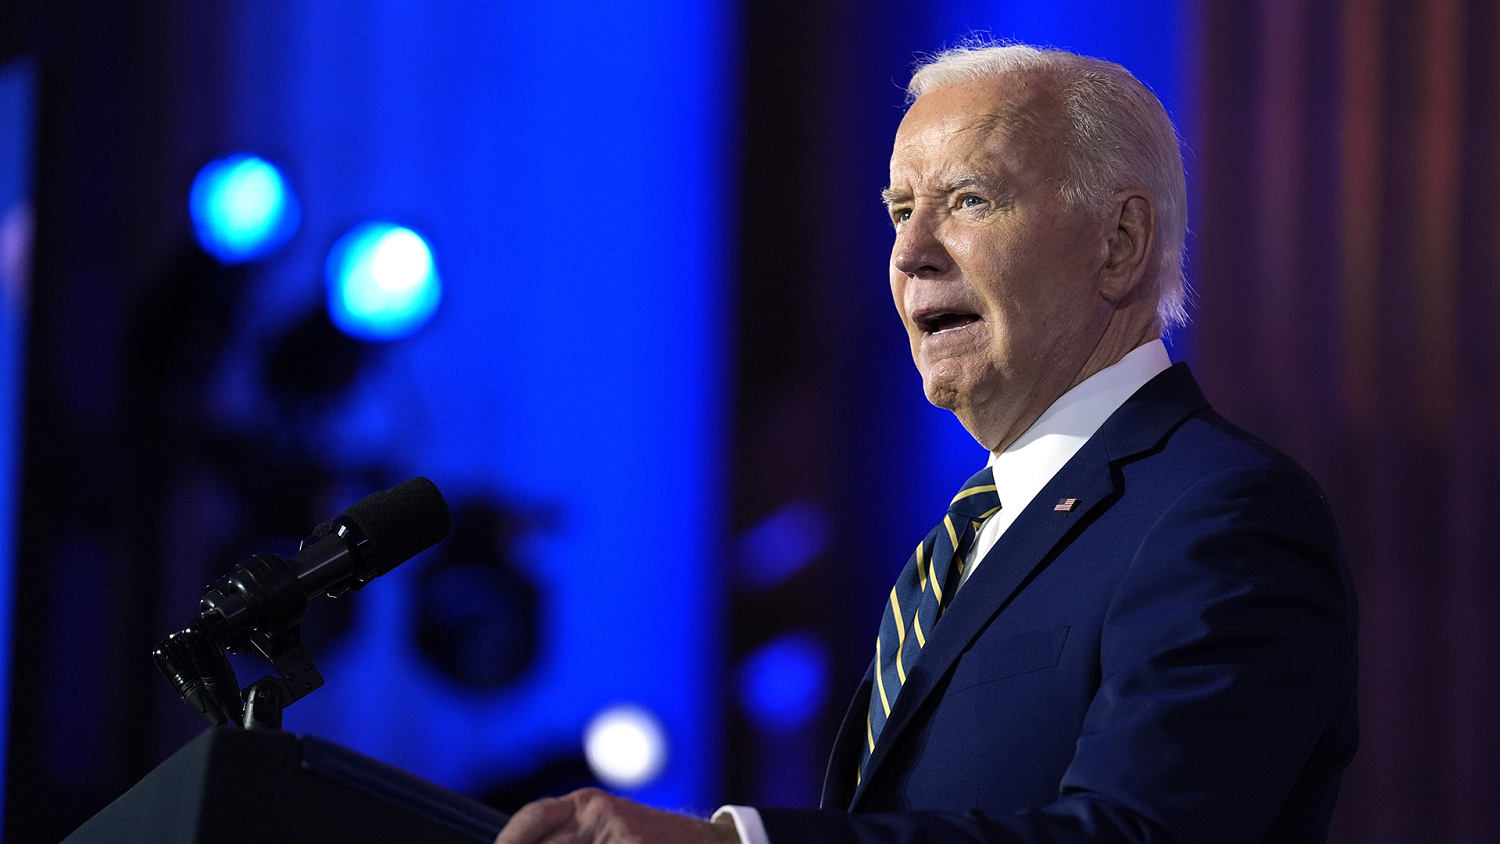 Biden holds first press conference since debate with Trump